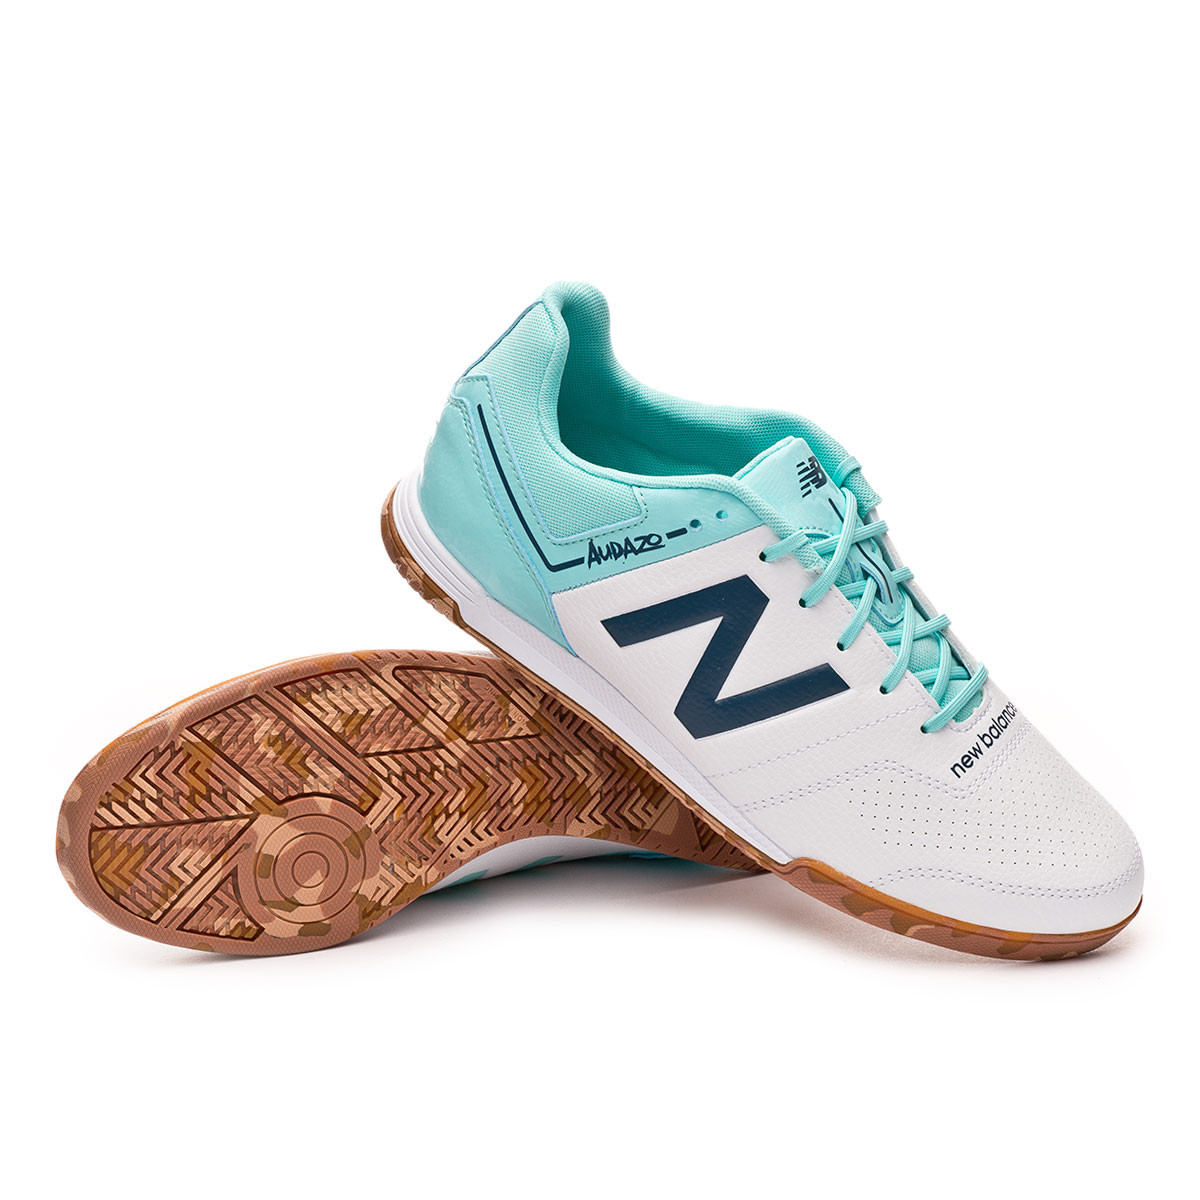 new balance indoor soccer shoes Cheaper 